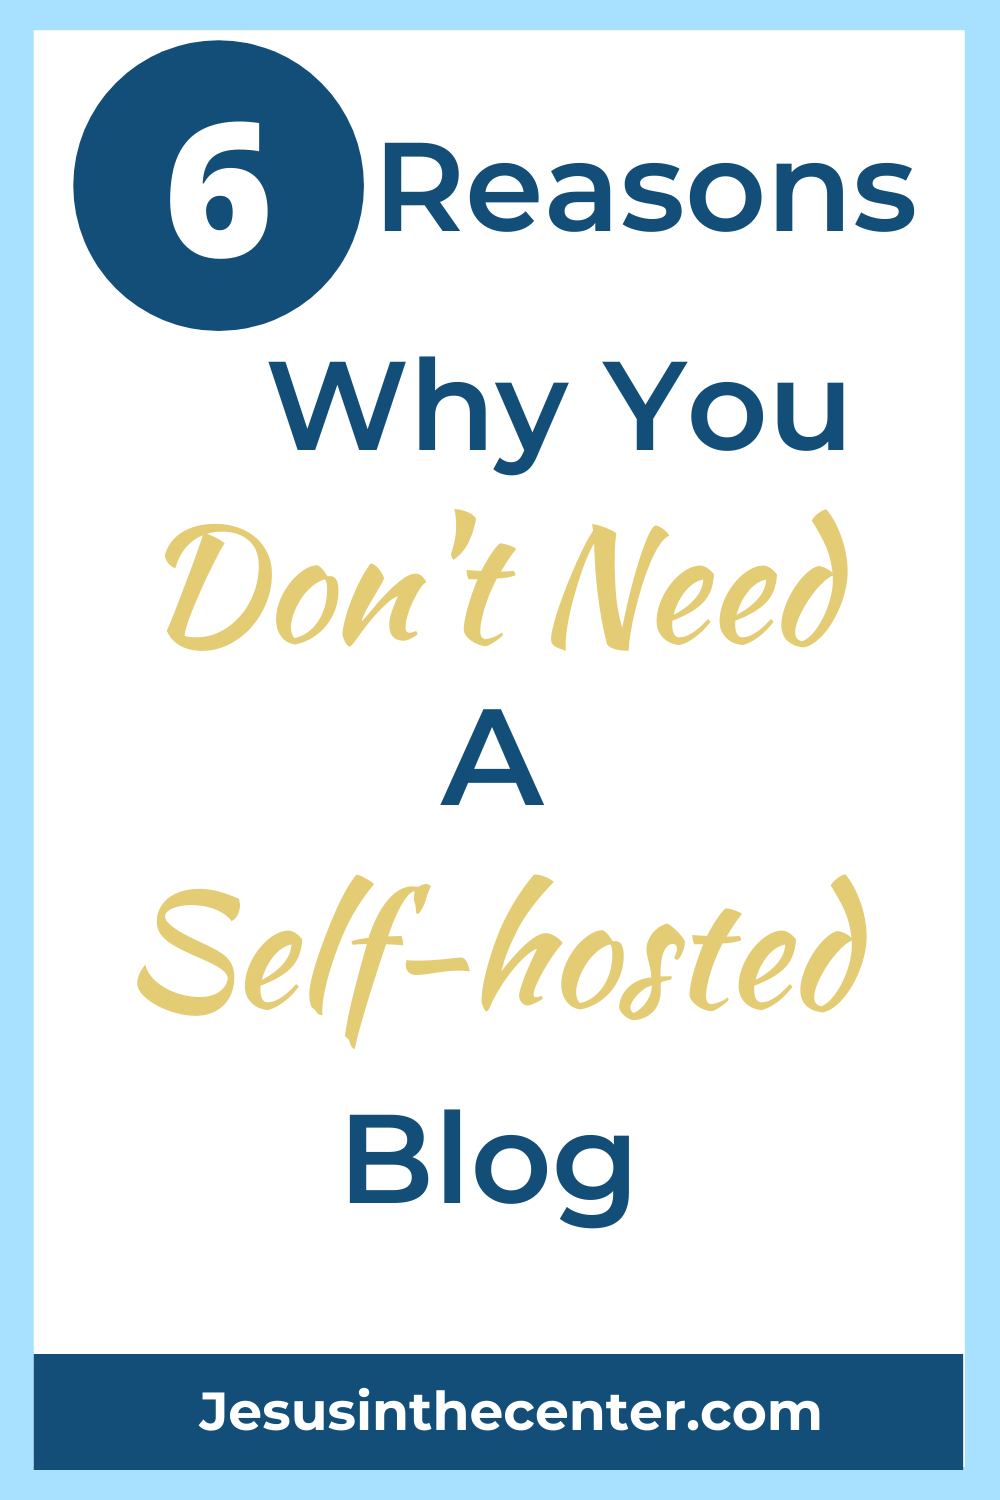 All of the professional bloggers say that you need to have a self-hosted blog? But is that really the case for every blogger? Are their valid reasons for having a hosted website?